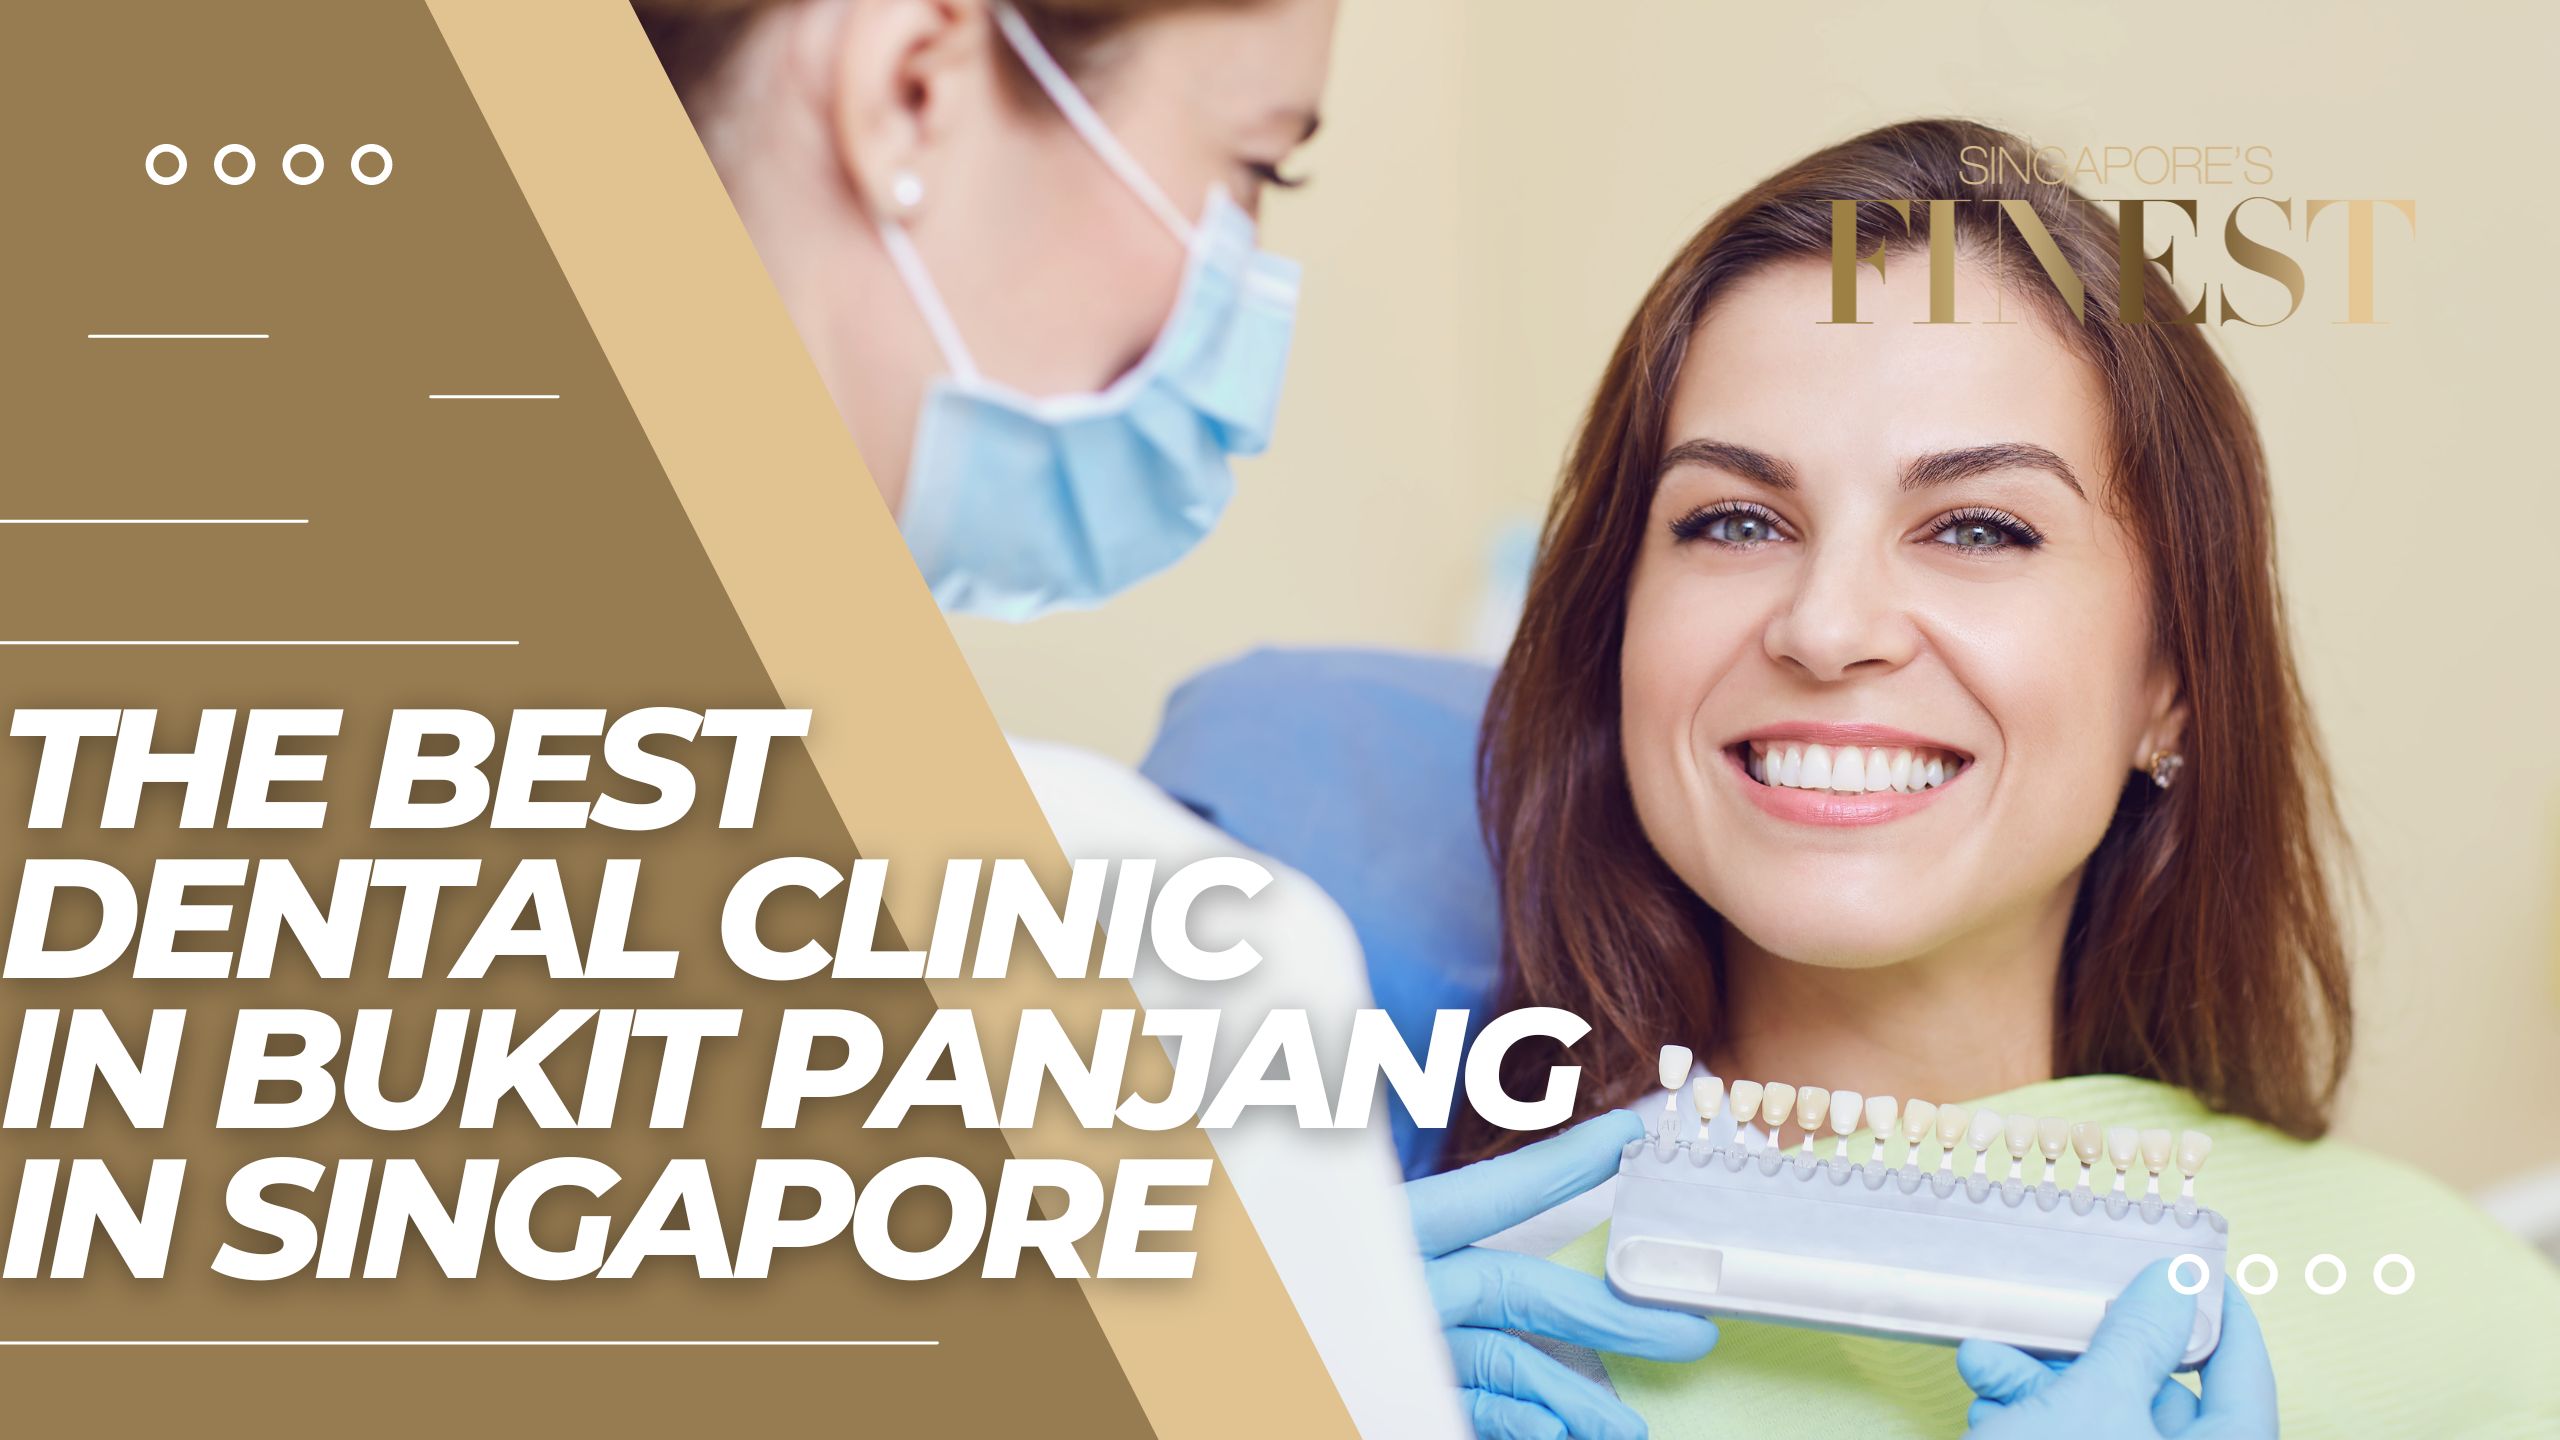 The Finest Dental Clinic in Bukit Panjang in Singapore